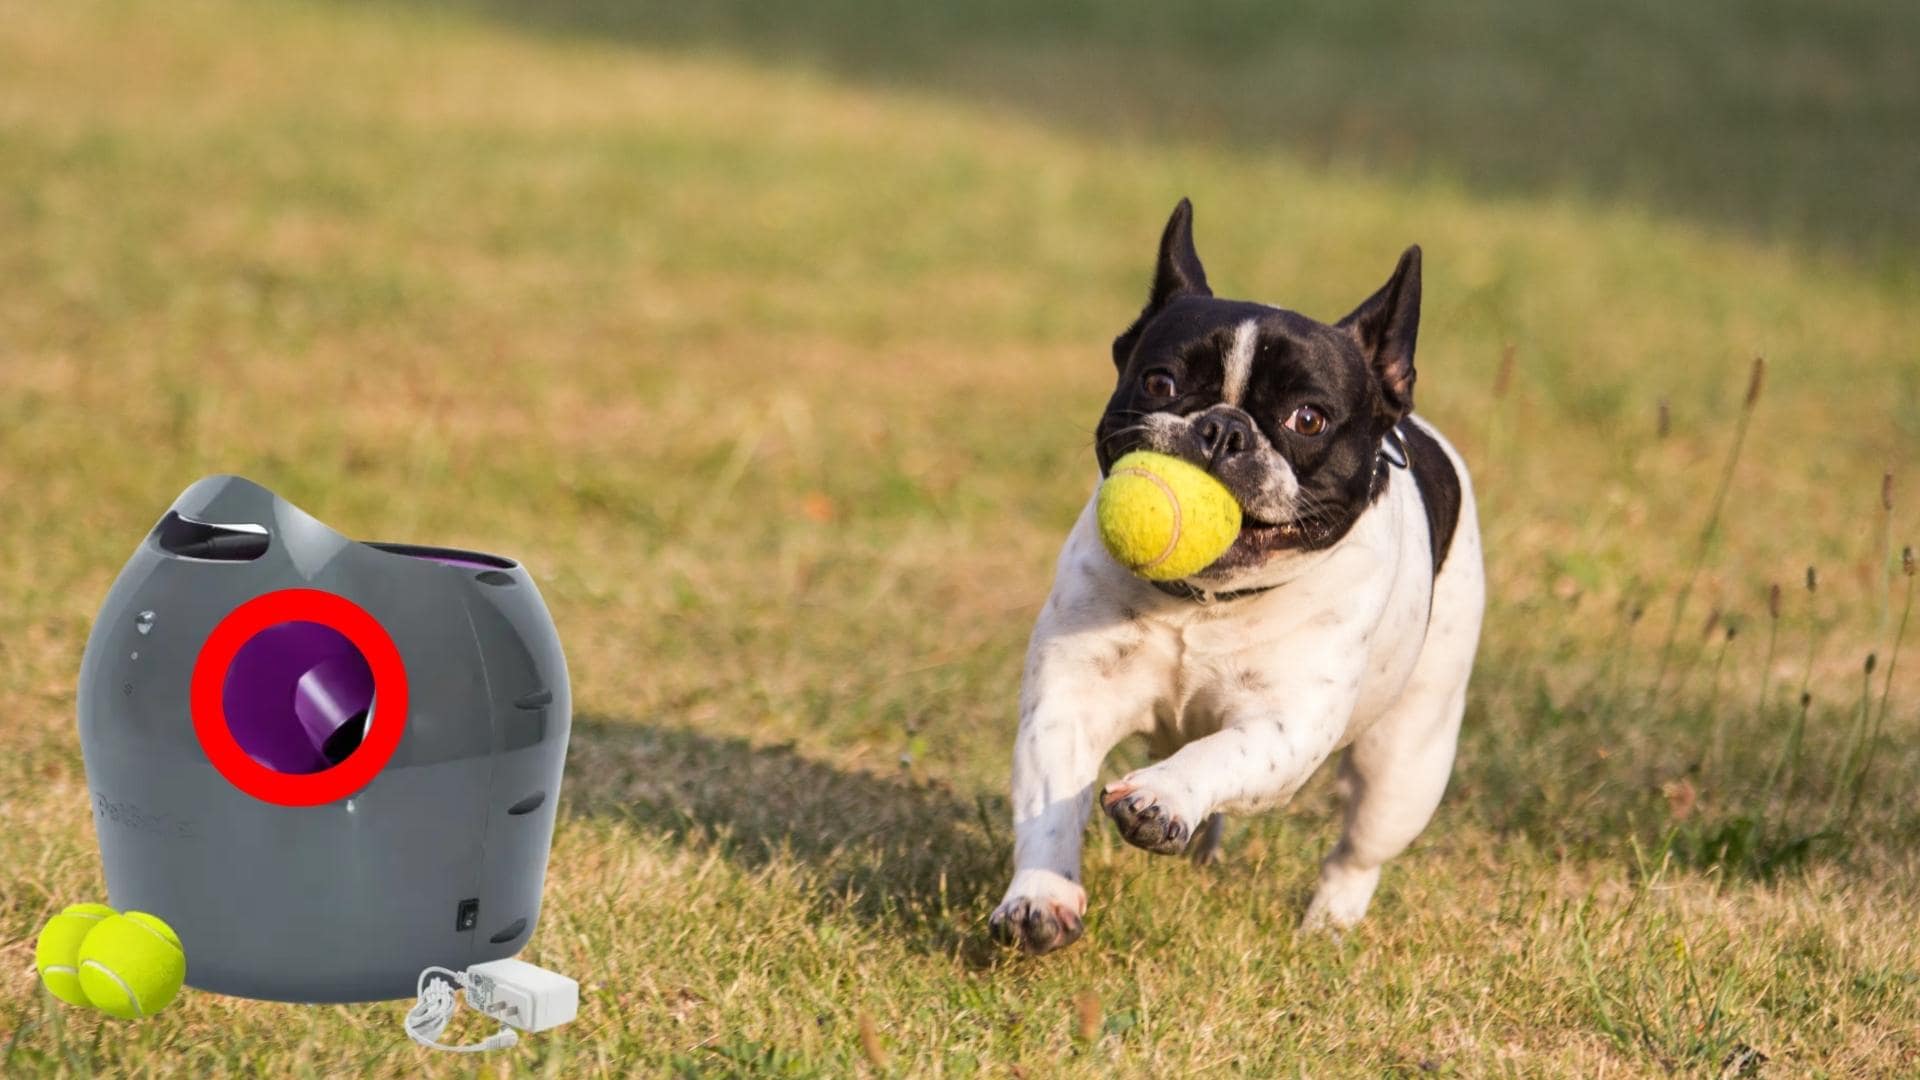 Are Ball Launchers Bad For Dogs? (Fully Explained!)